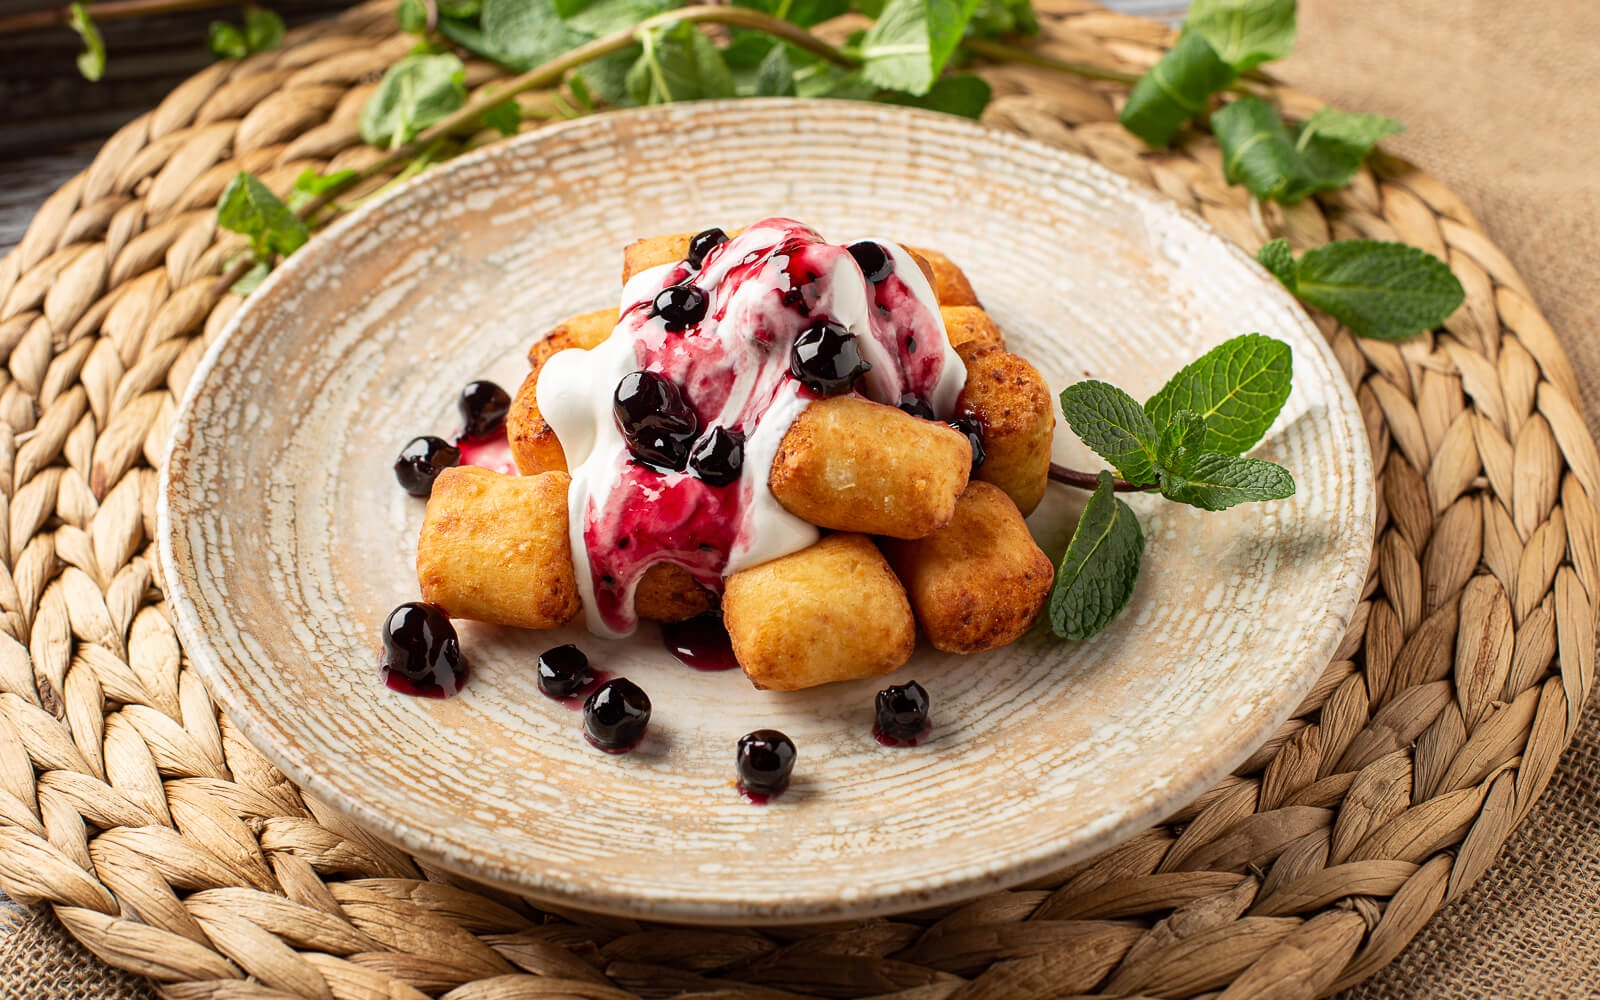 Russian doughnuts with jam and sour cream